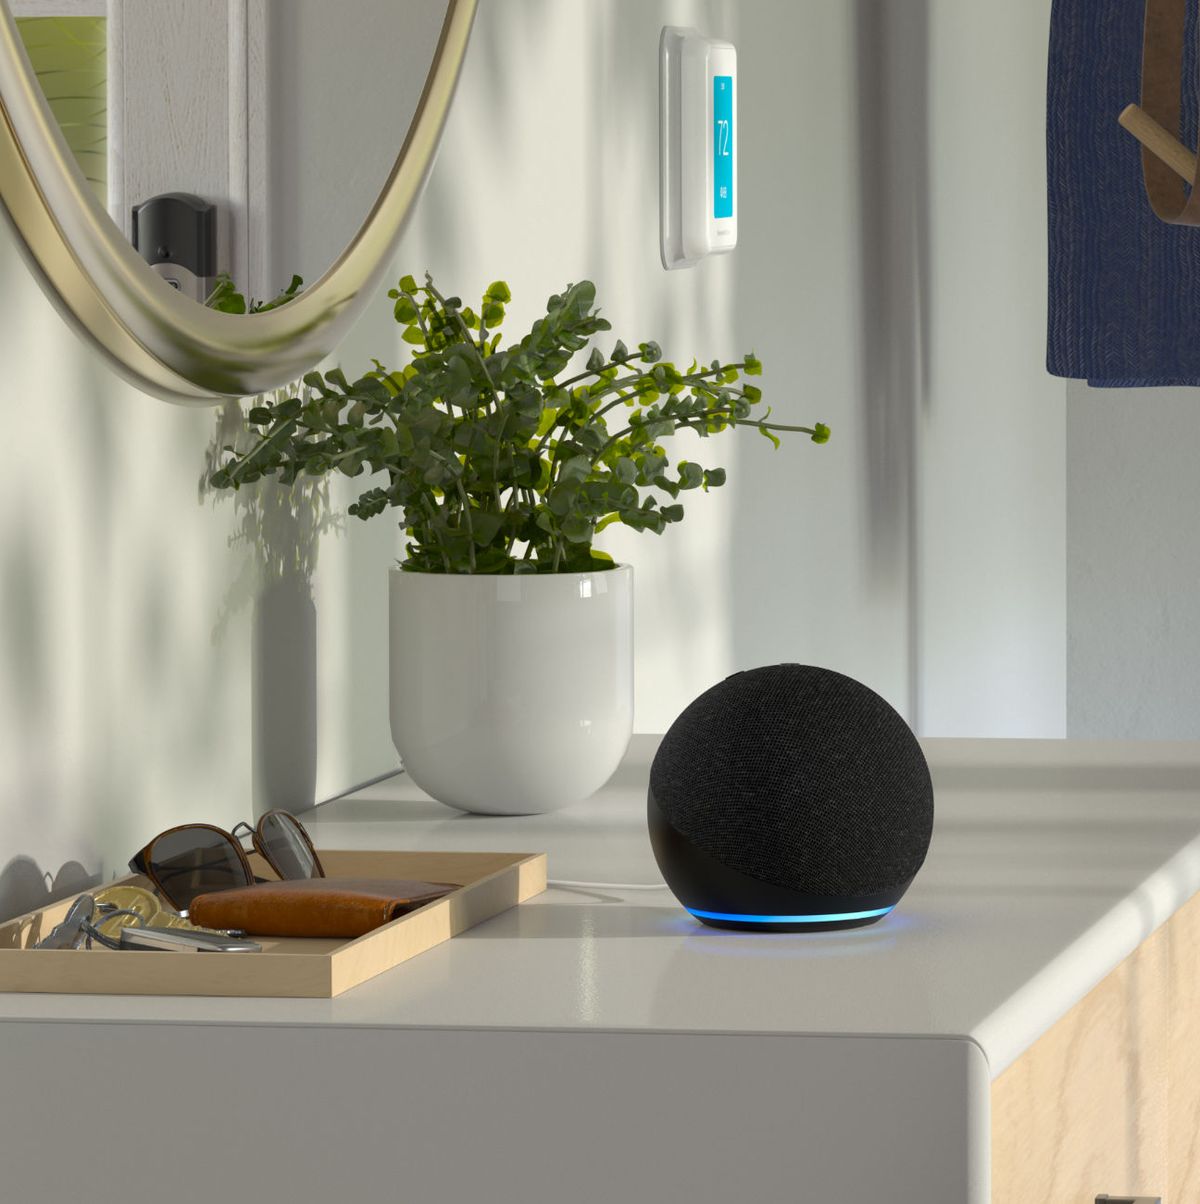 How To Do Home Automation With Alexa